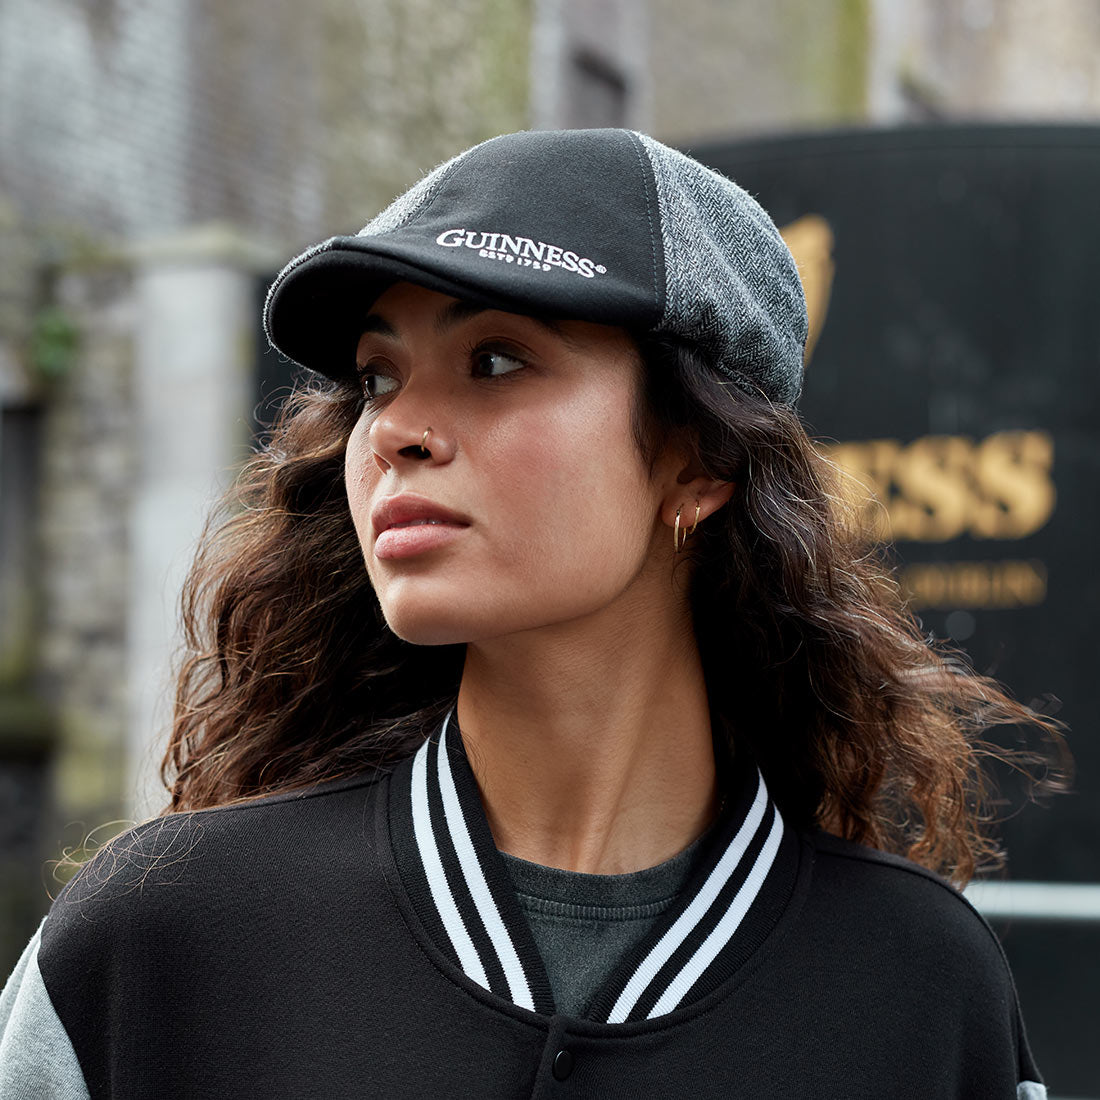 A young woman donning an embroidered Guinness Paneled Ivy Cap.